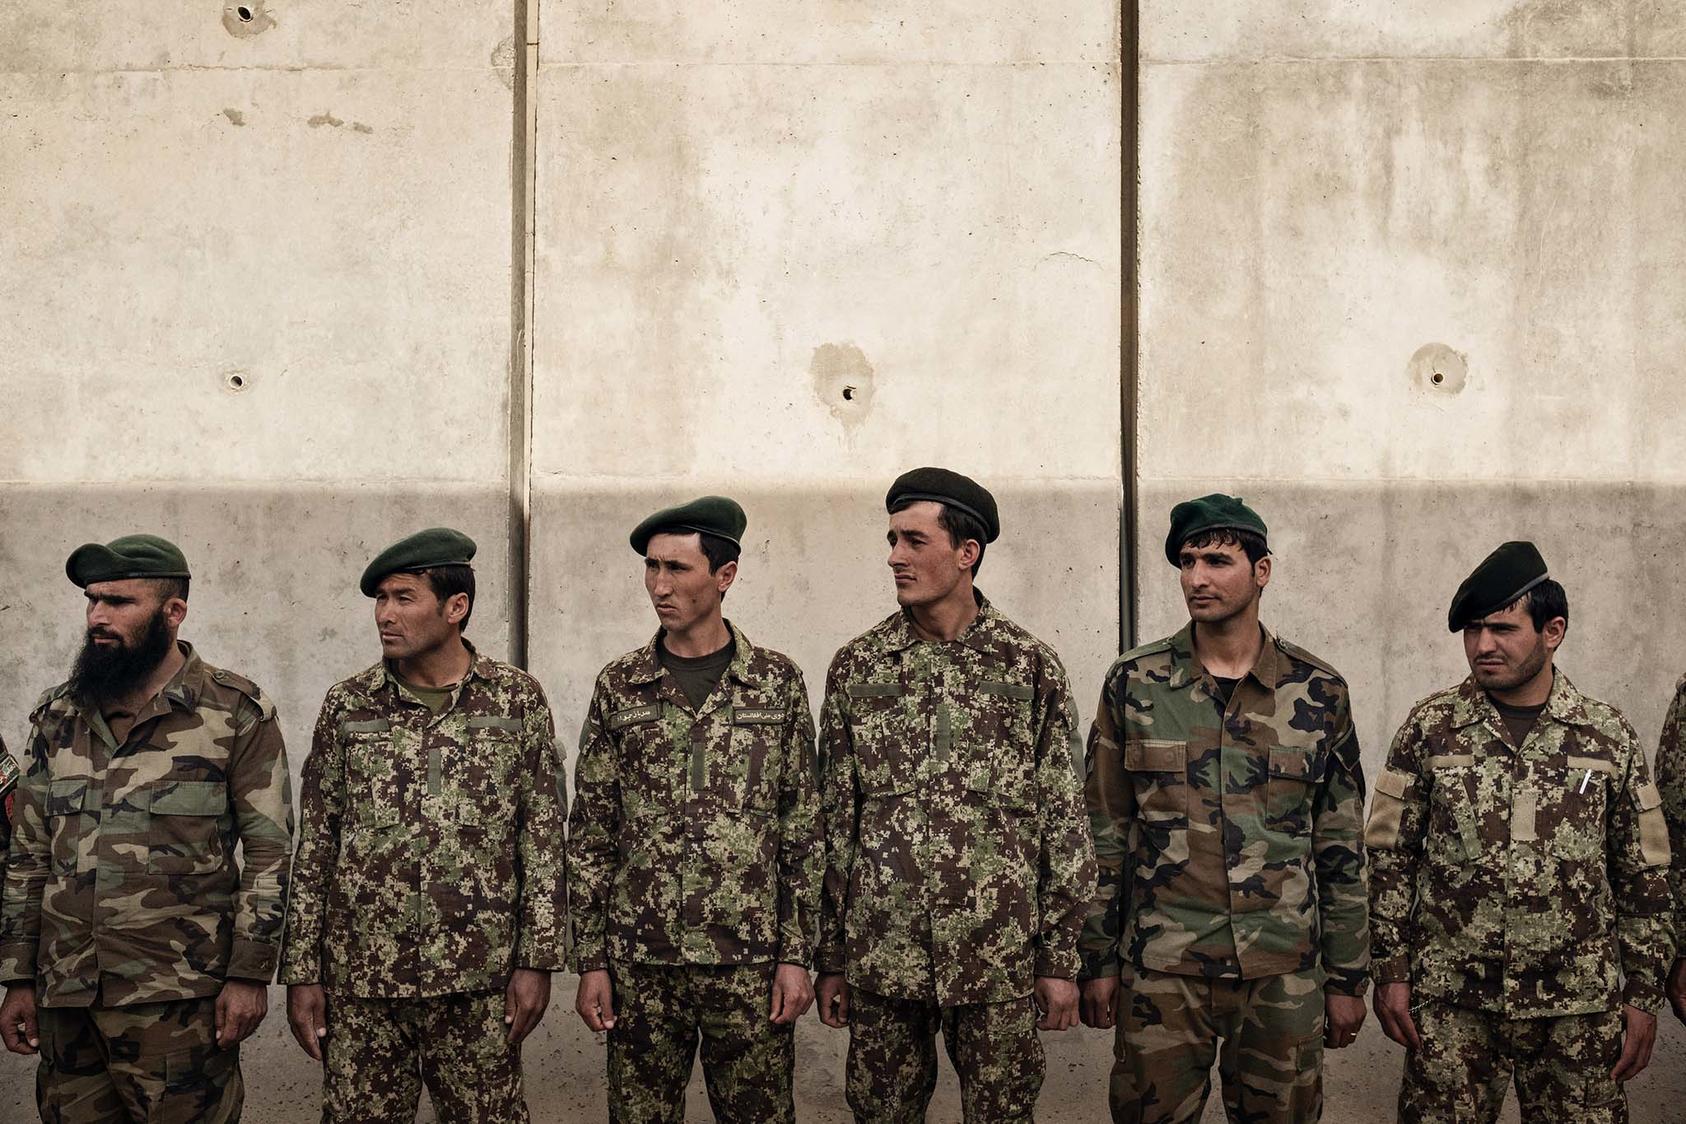 Members of the Afghan National Army stand at attention at Camp Bastion in Helmand Province, Afghanistan, March 21, 2016. A 2016 investigation found that 40 percent of the Afghan troops supposedly fighting in Helmand either did not exist or were dead. (Adam Ferguson/The New York Times)